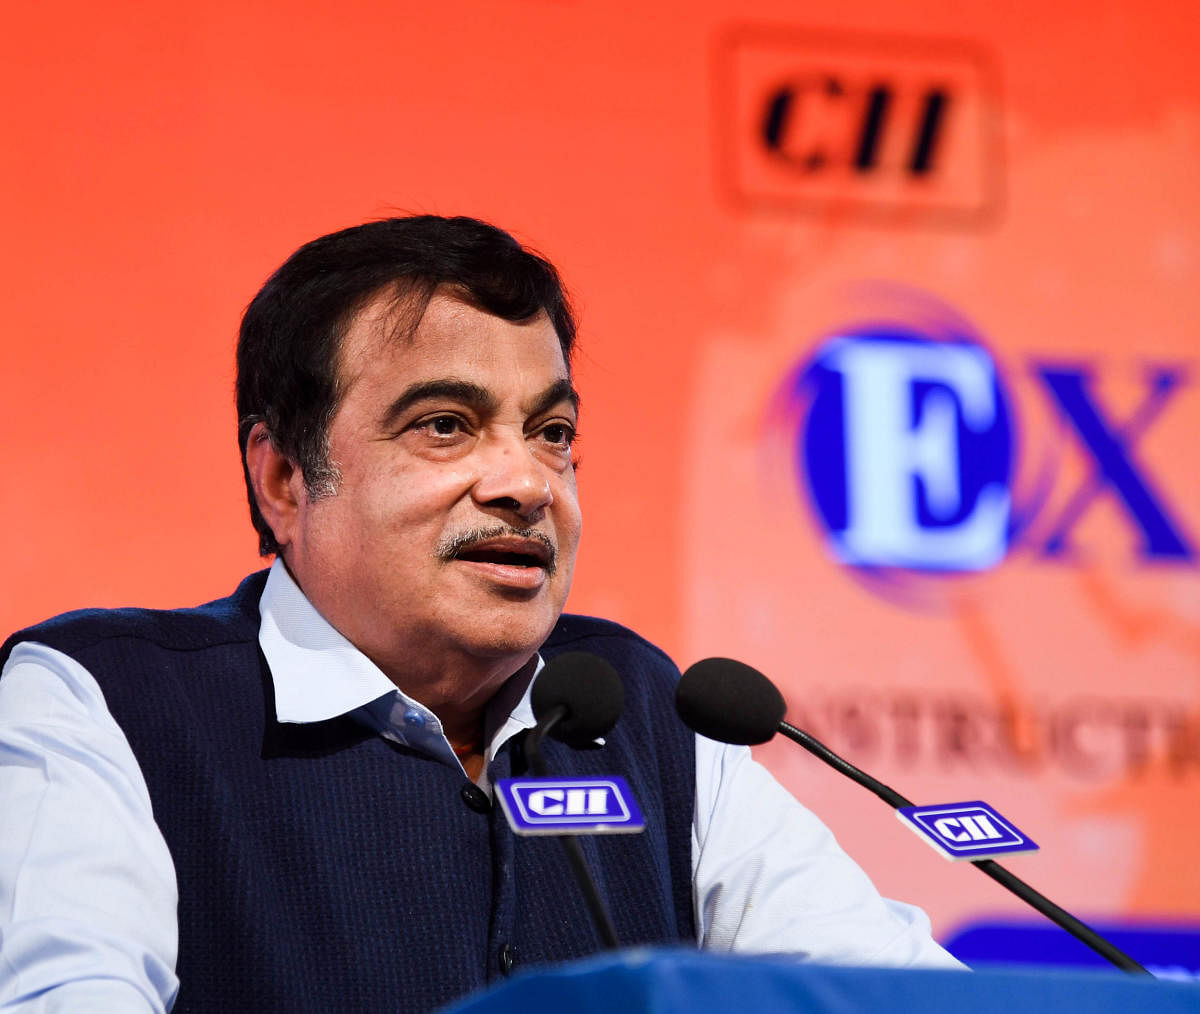 Union Minister Nitin Gadkari at the inauguration of Excon 10th edition, organised by the CII in Bengaluru on Tuesday. DH Photo/B H Shivakumar